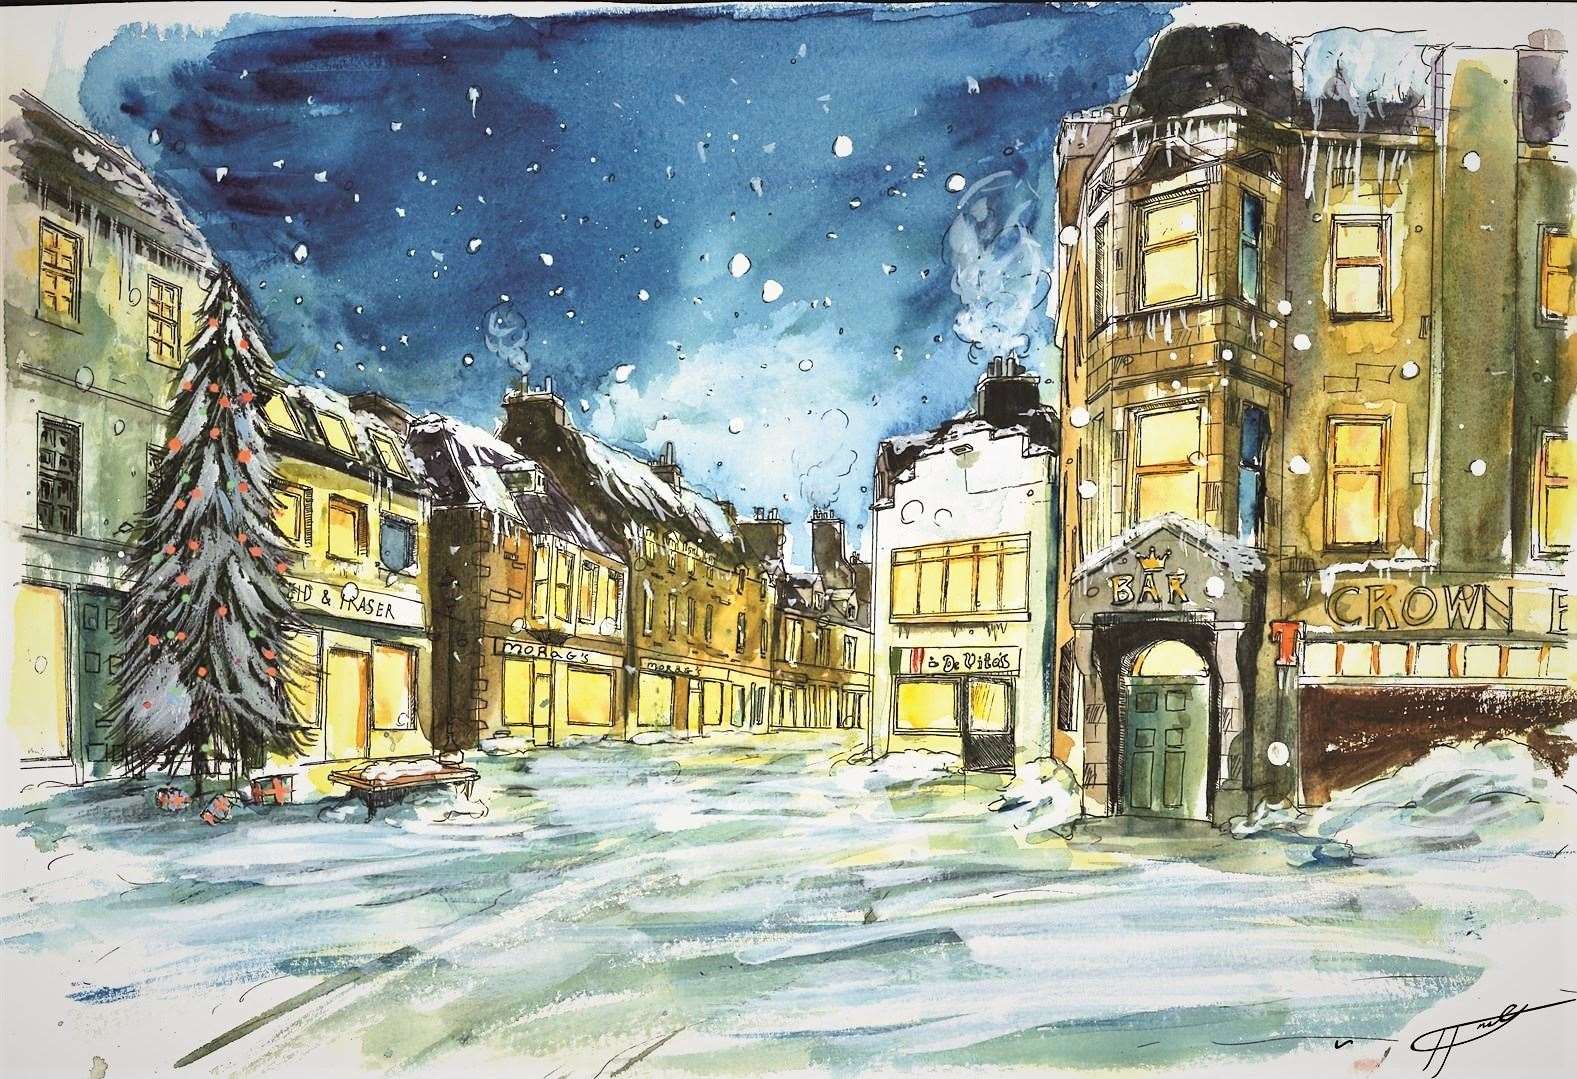 The Wick Christmas postcard was designed by JJ McGuckin from Sustrans, the organisation that is creating plans for the redesign of Wick town centre.